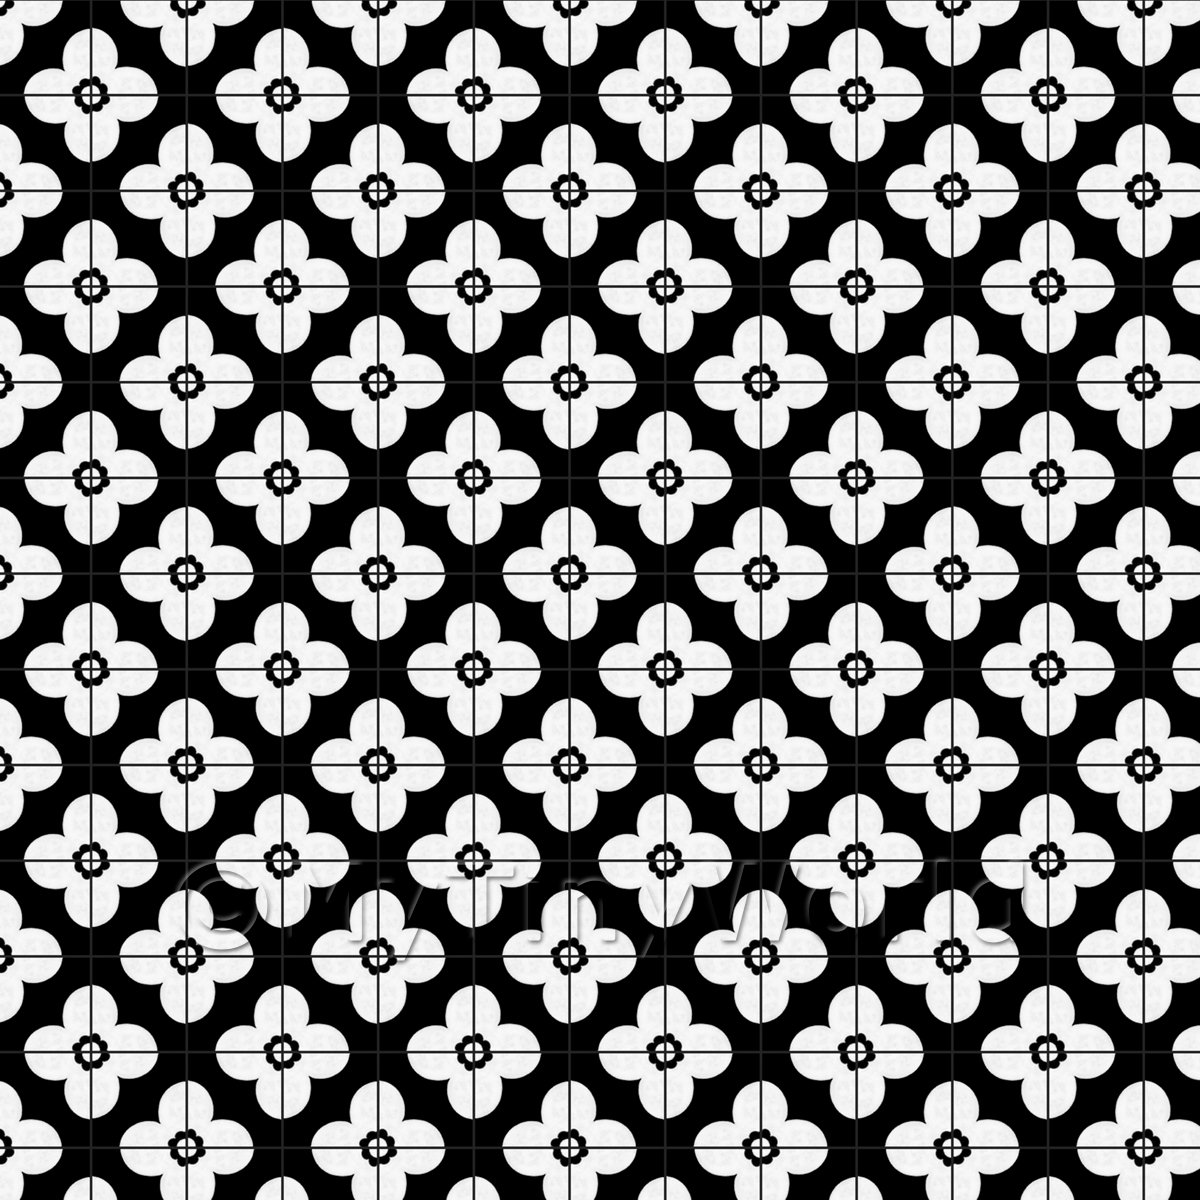 1:12th White Flower Design Tile Sheet With Black Grout 